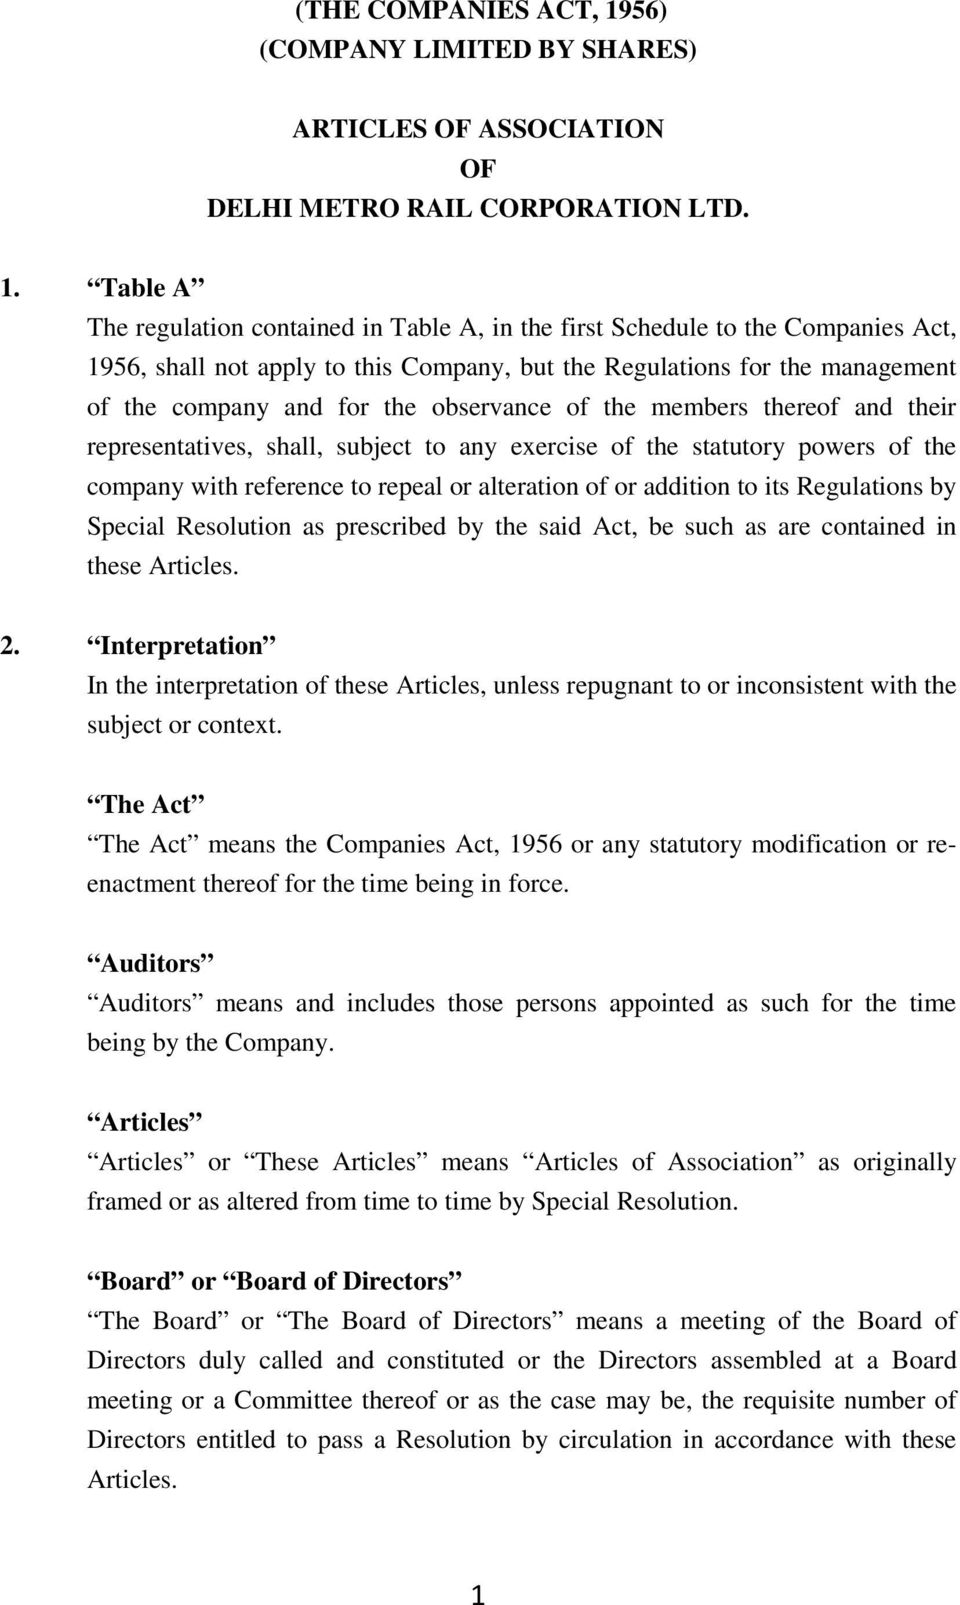 Table A The regulation contained in Table A, in the first Schedule to the Companies Act, 1956, shall not apply to this Company, but the Regulations for the management of the company and for the